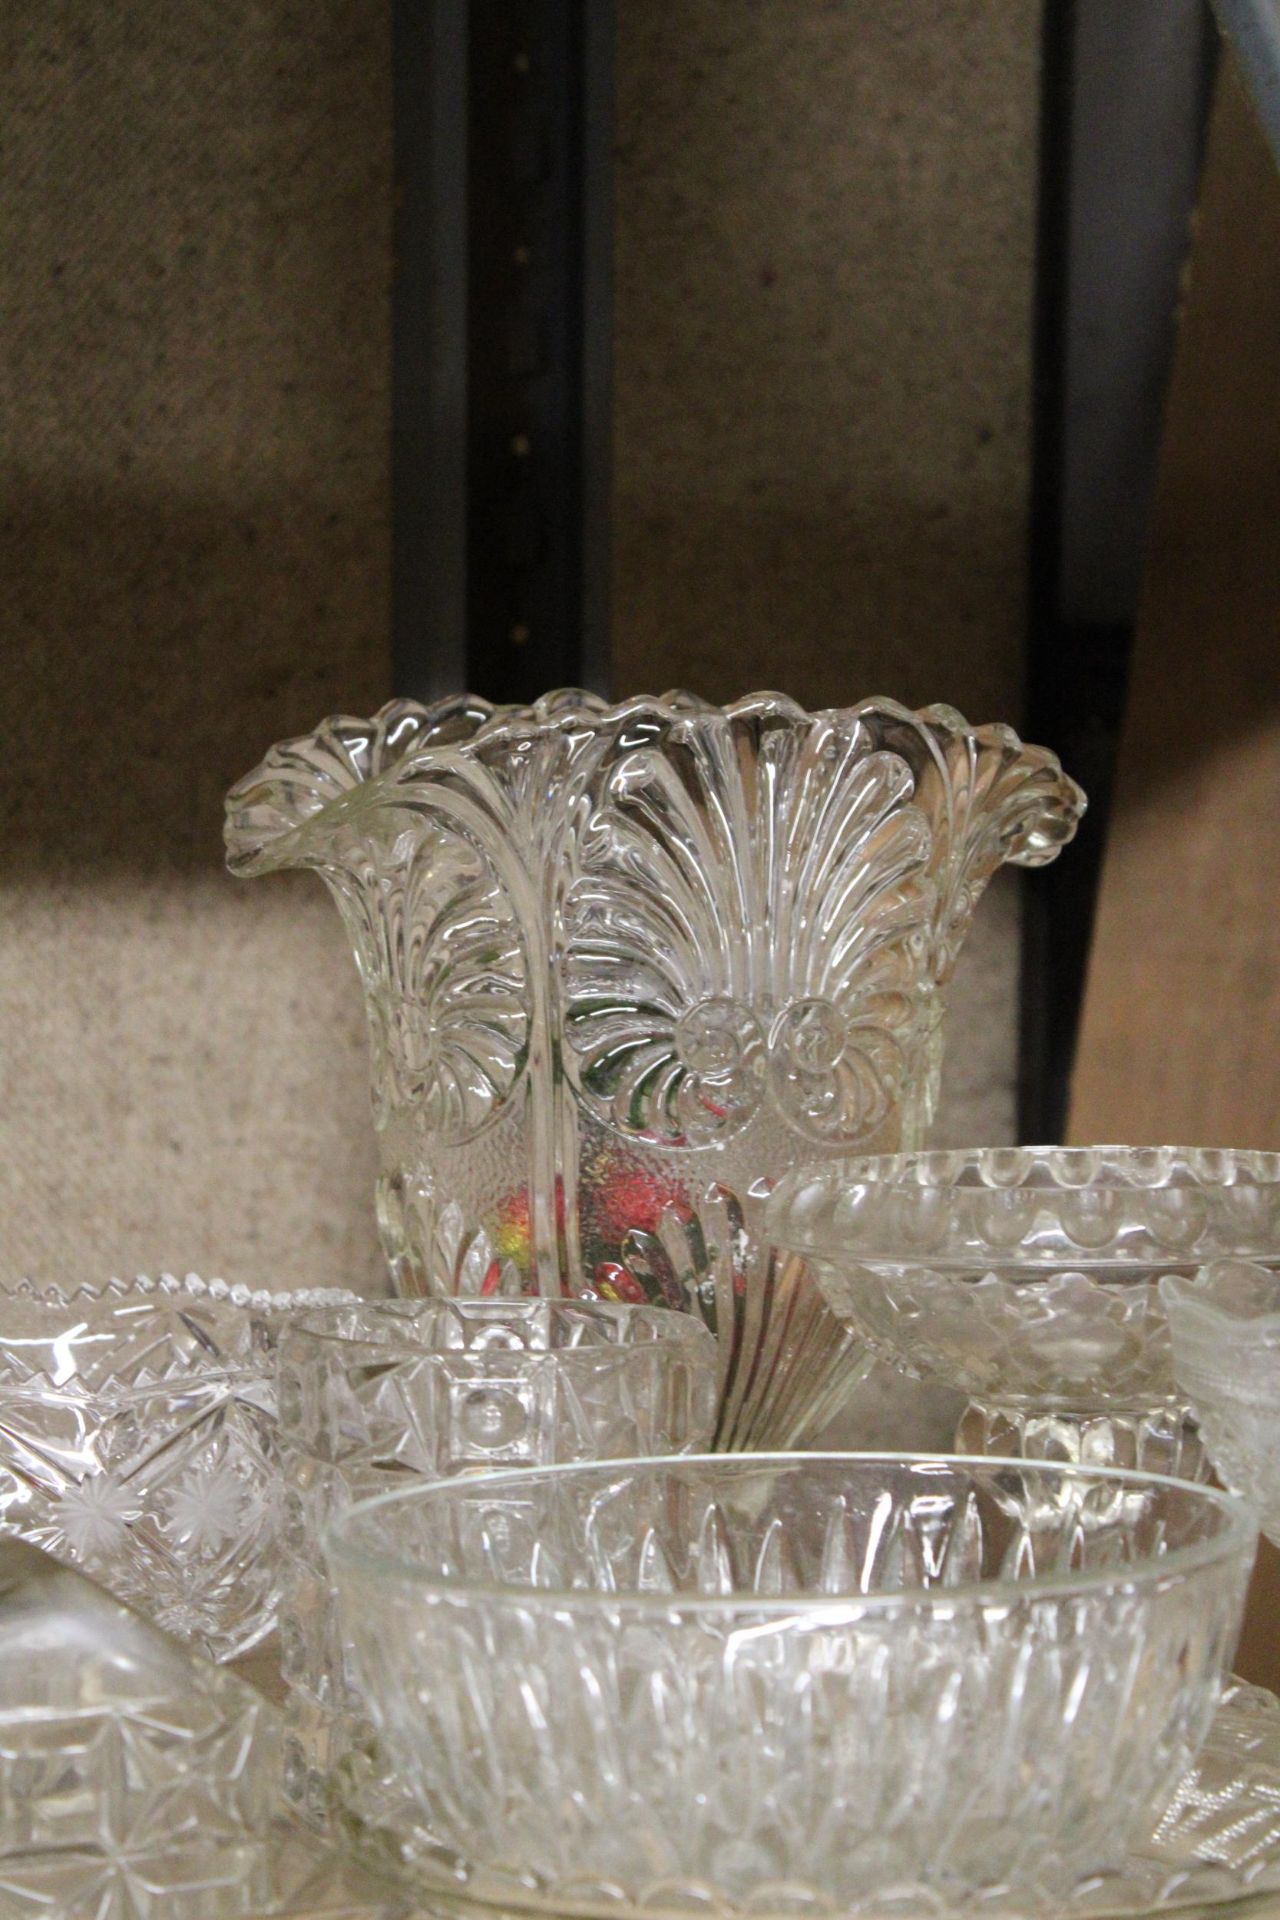 A QUANTITY OF GLASSWARE TO INCLUDE A LARGE VASE, BOWLS, FOOTED BOWLS, A CHEESE DISH, ETC - Image 2 of 4